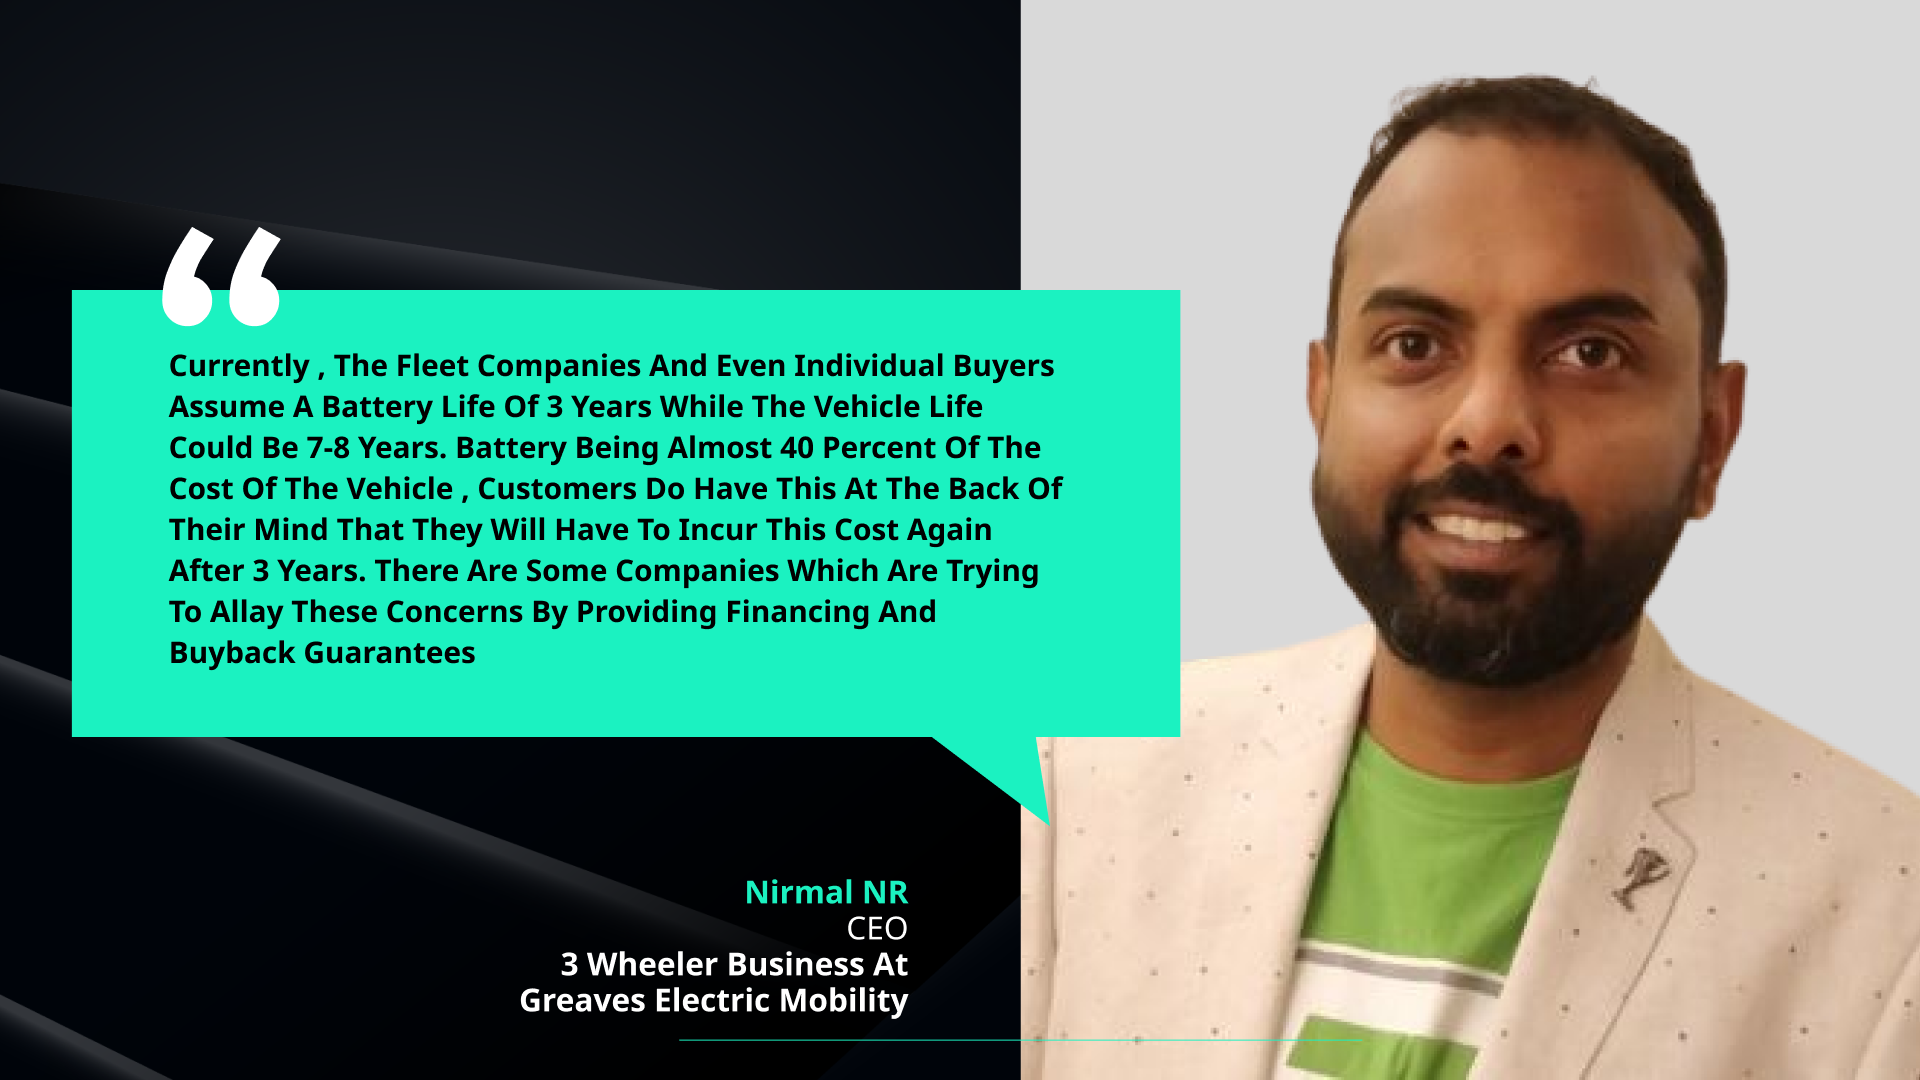 Insightful Q&A Session with Mr Nirmal, CEO - 3 wheeler Business of Greaves Electric Mobility.